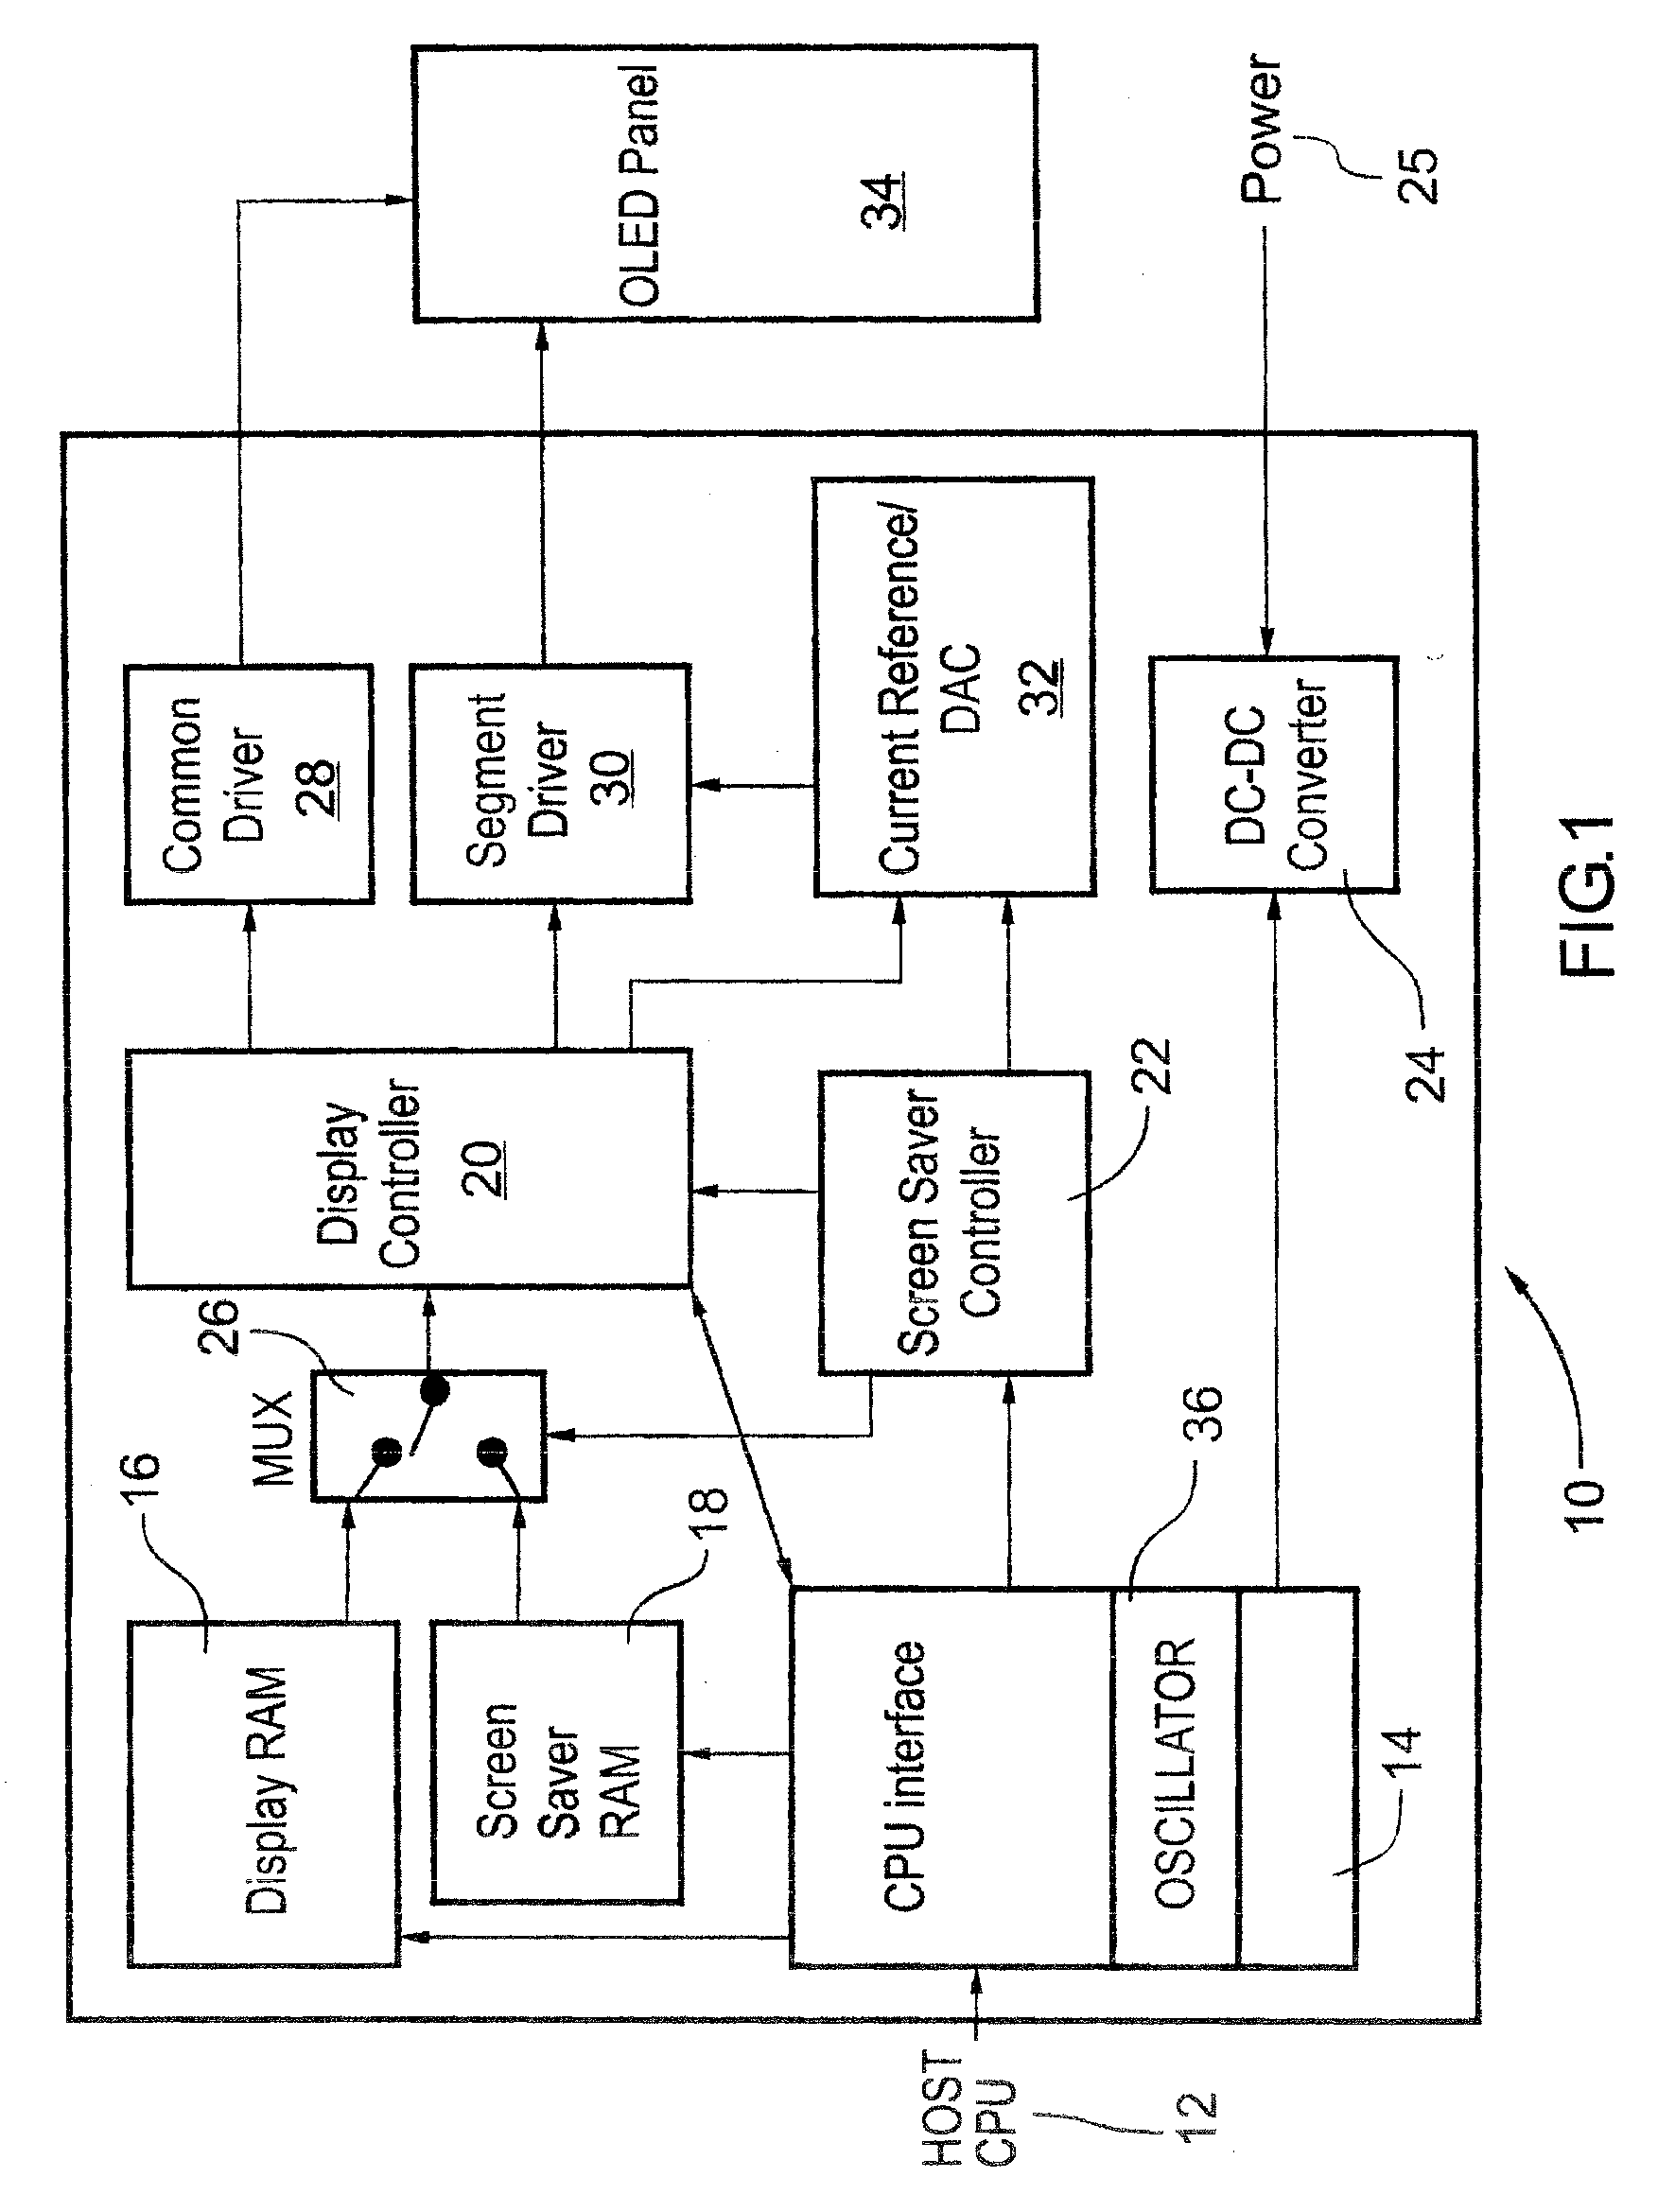 Method and system for providing a screen saver in a mobile electronic device